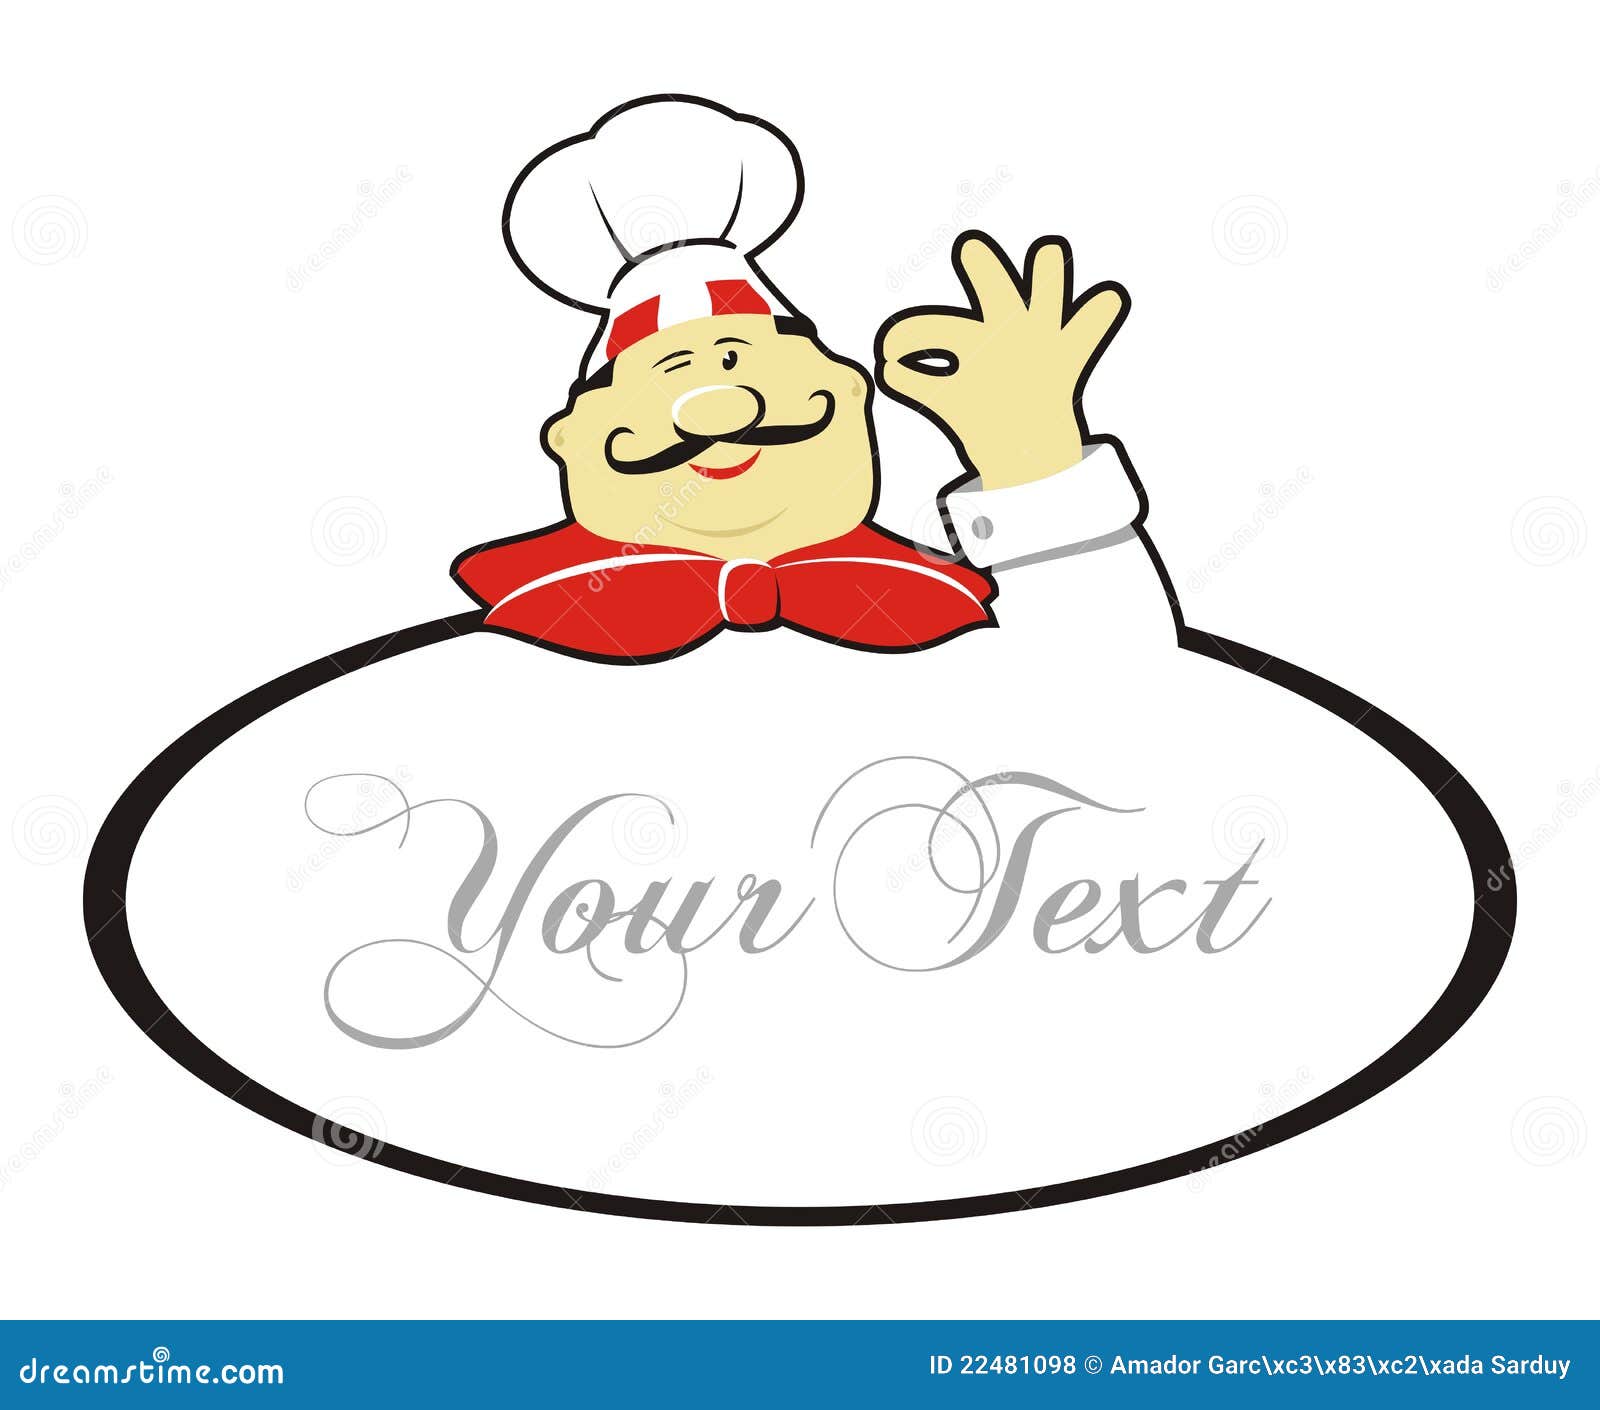 clipart chef cooking - photo #41